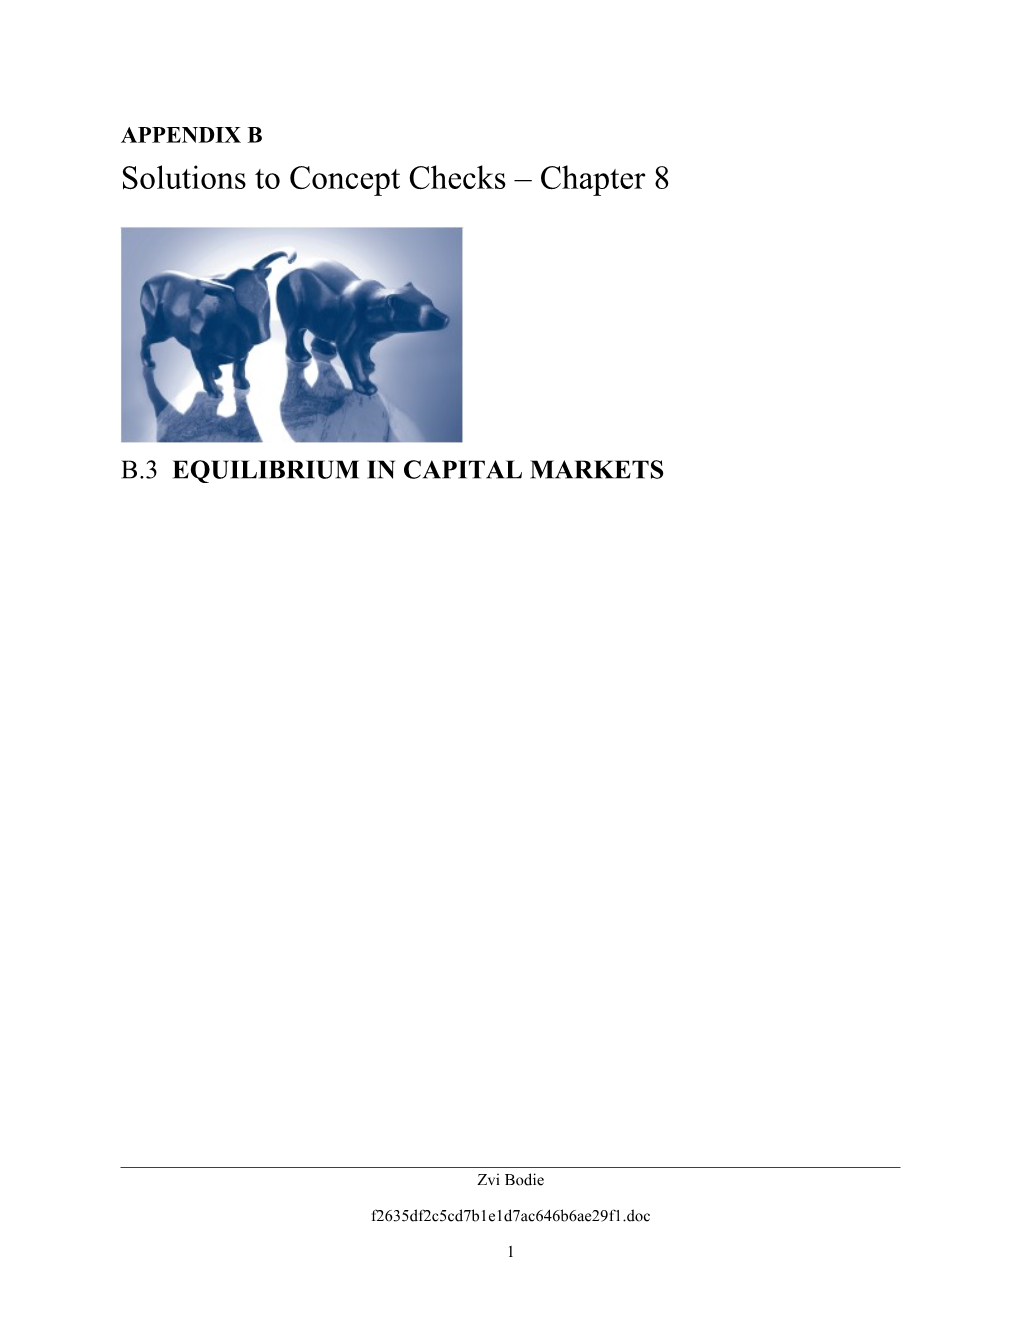 Chapter 8 Index Models and the Arbitrage Pricing Theory